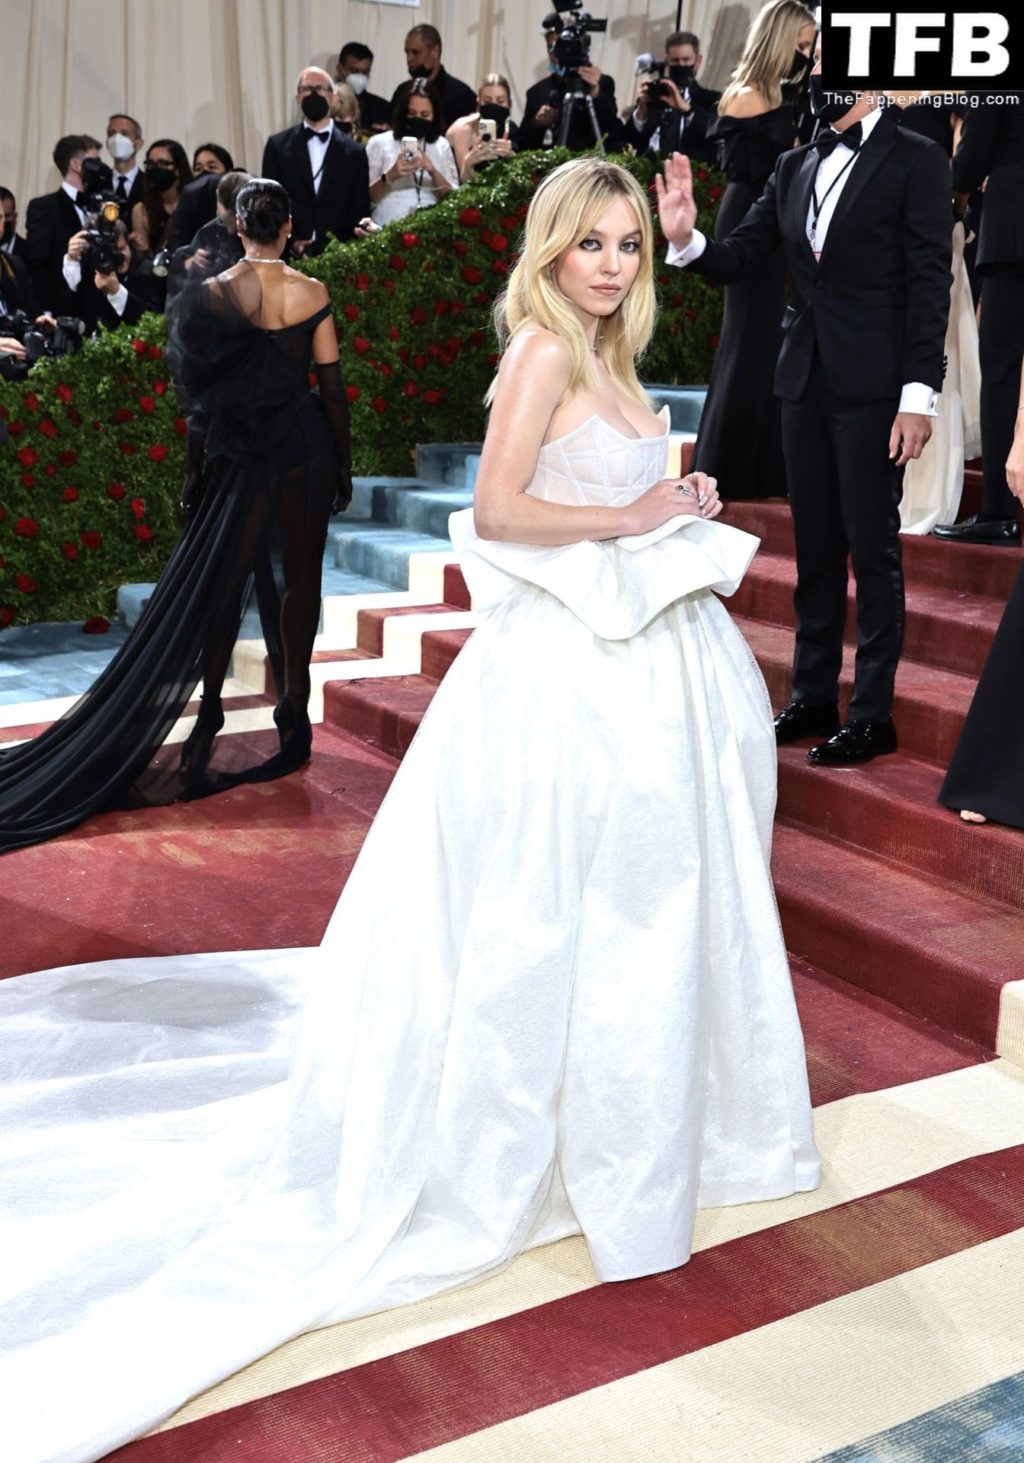 Sydney Sweeney Sexy The Fappening Blog 77 1024x1463 - Sydney Sweeney Looks Hot in White at The 2022 Met Gala in NYC (132 Photos)